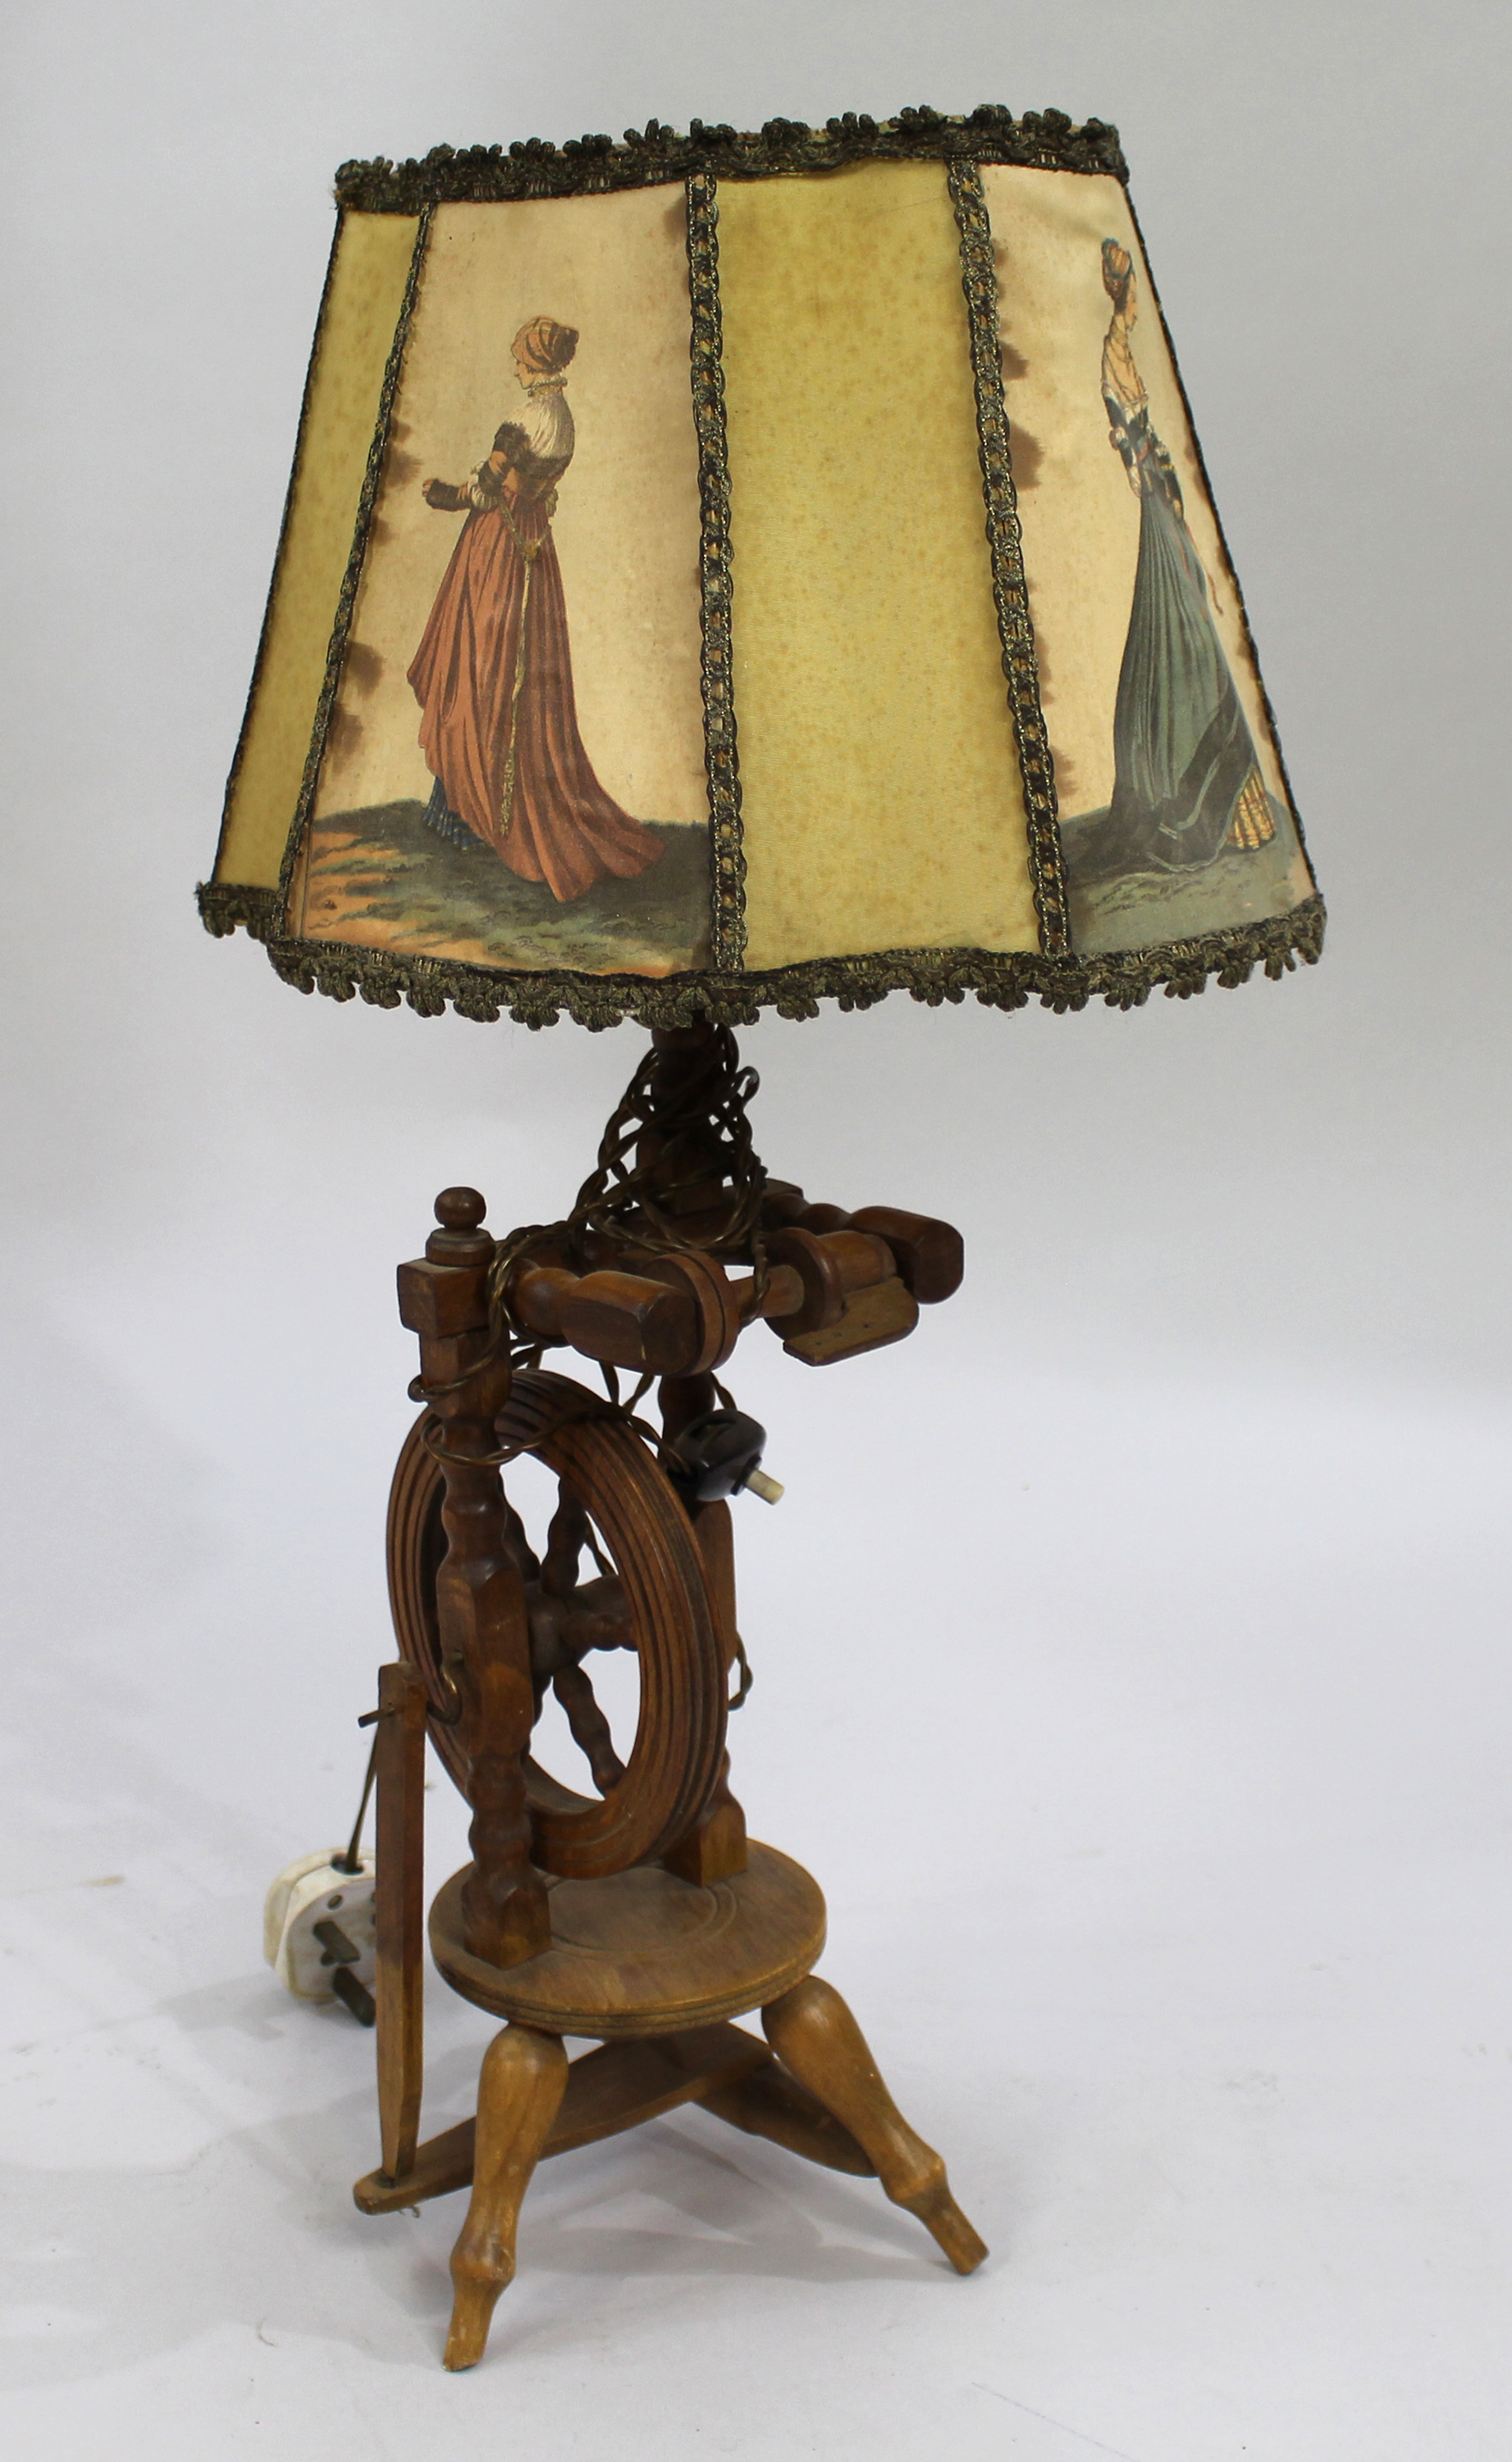 Collection of 6 Vintage Table Lamps - Image 11 of 17